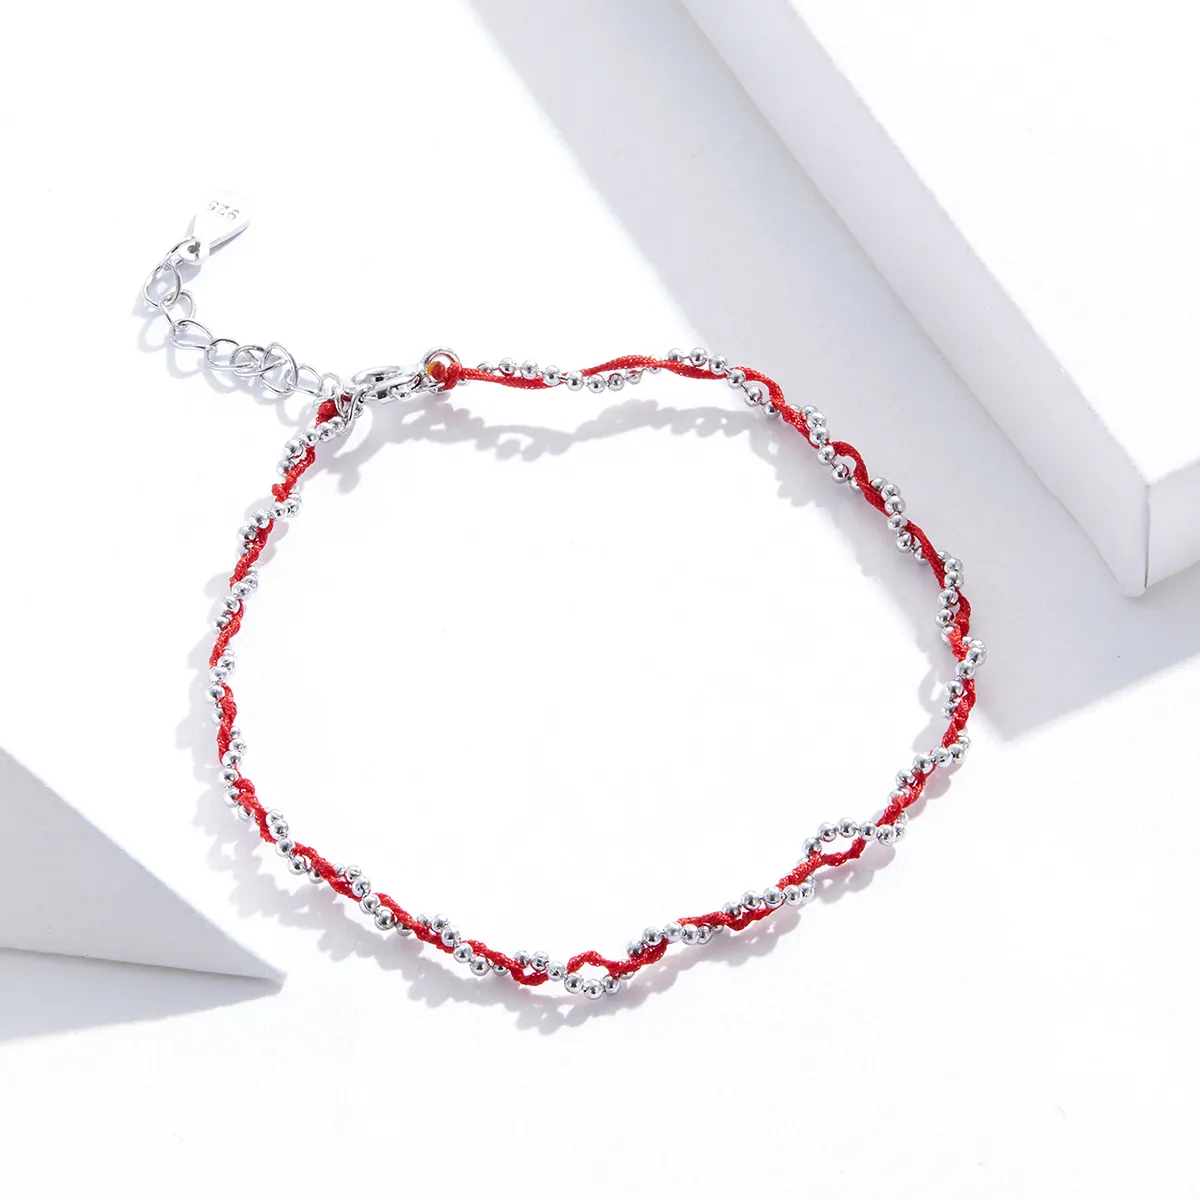 Silver & Red Rope Bracelet - SCB173-Rd